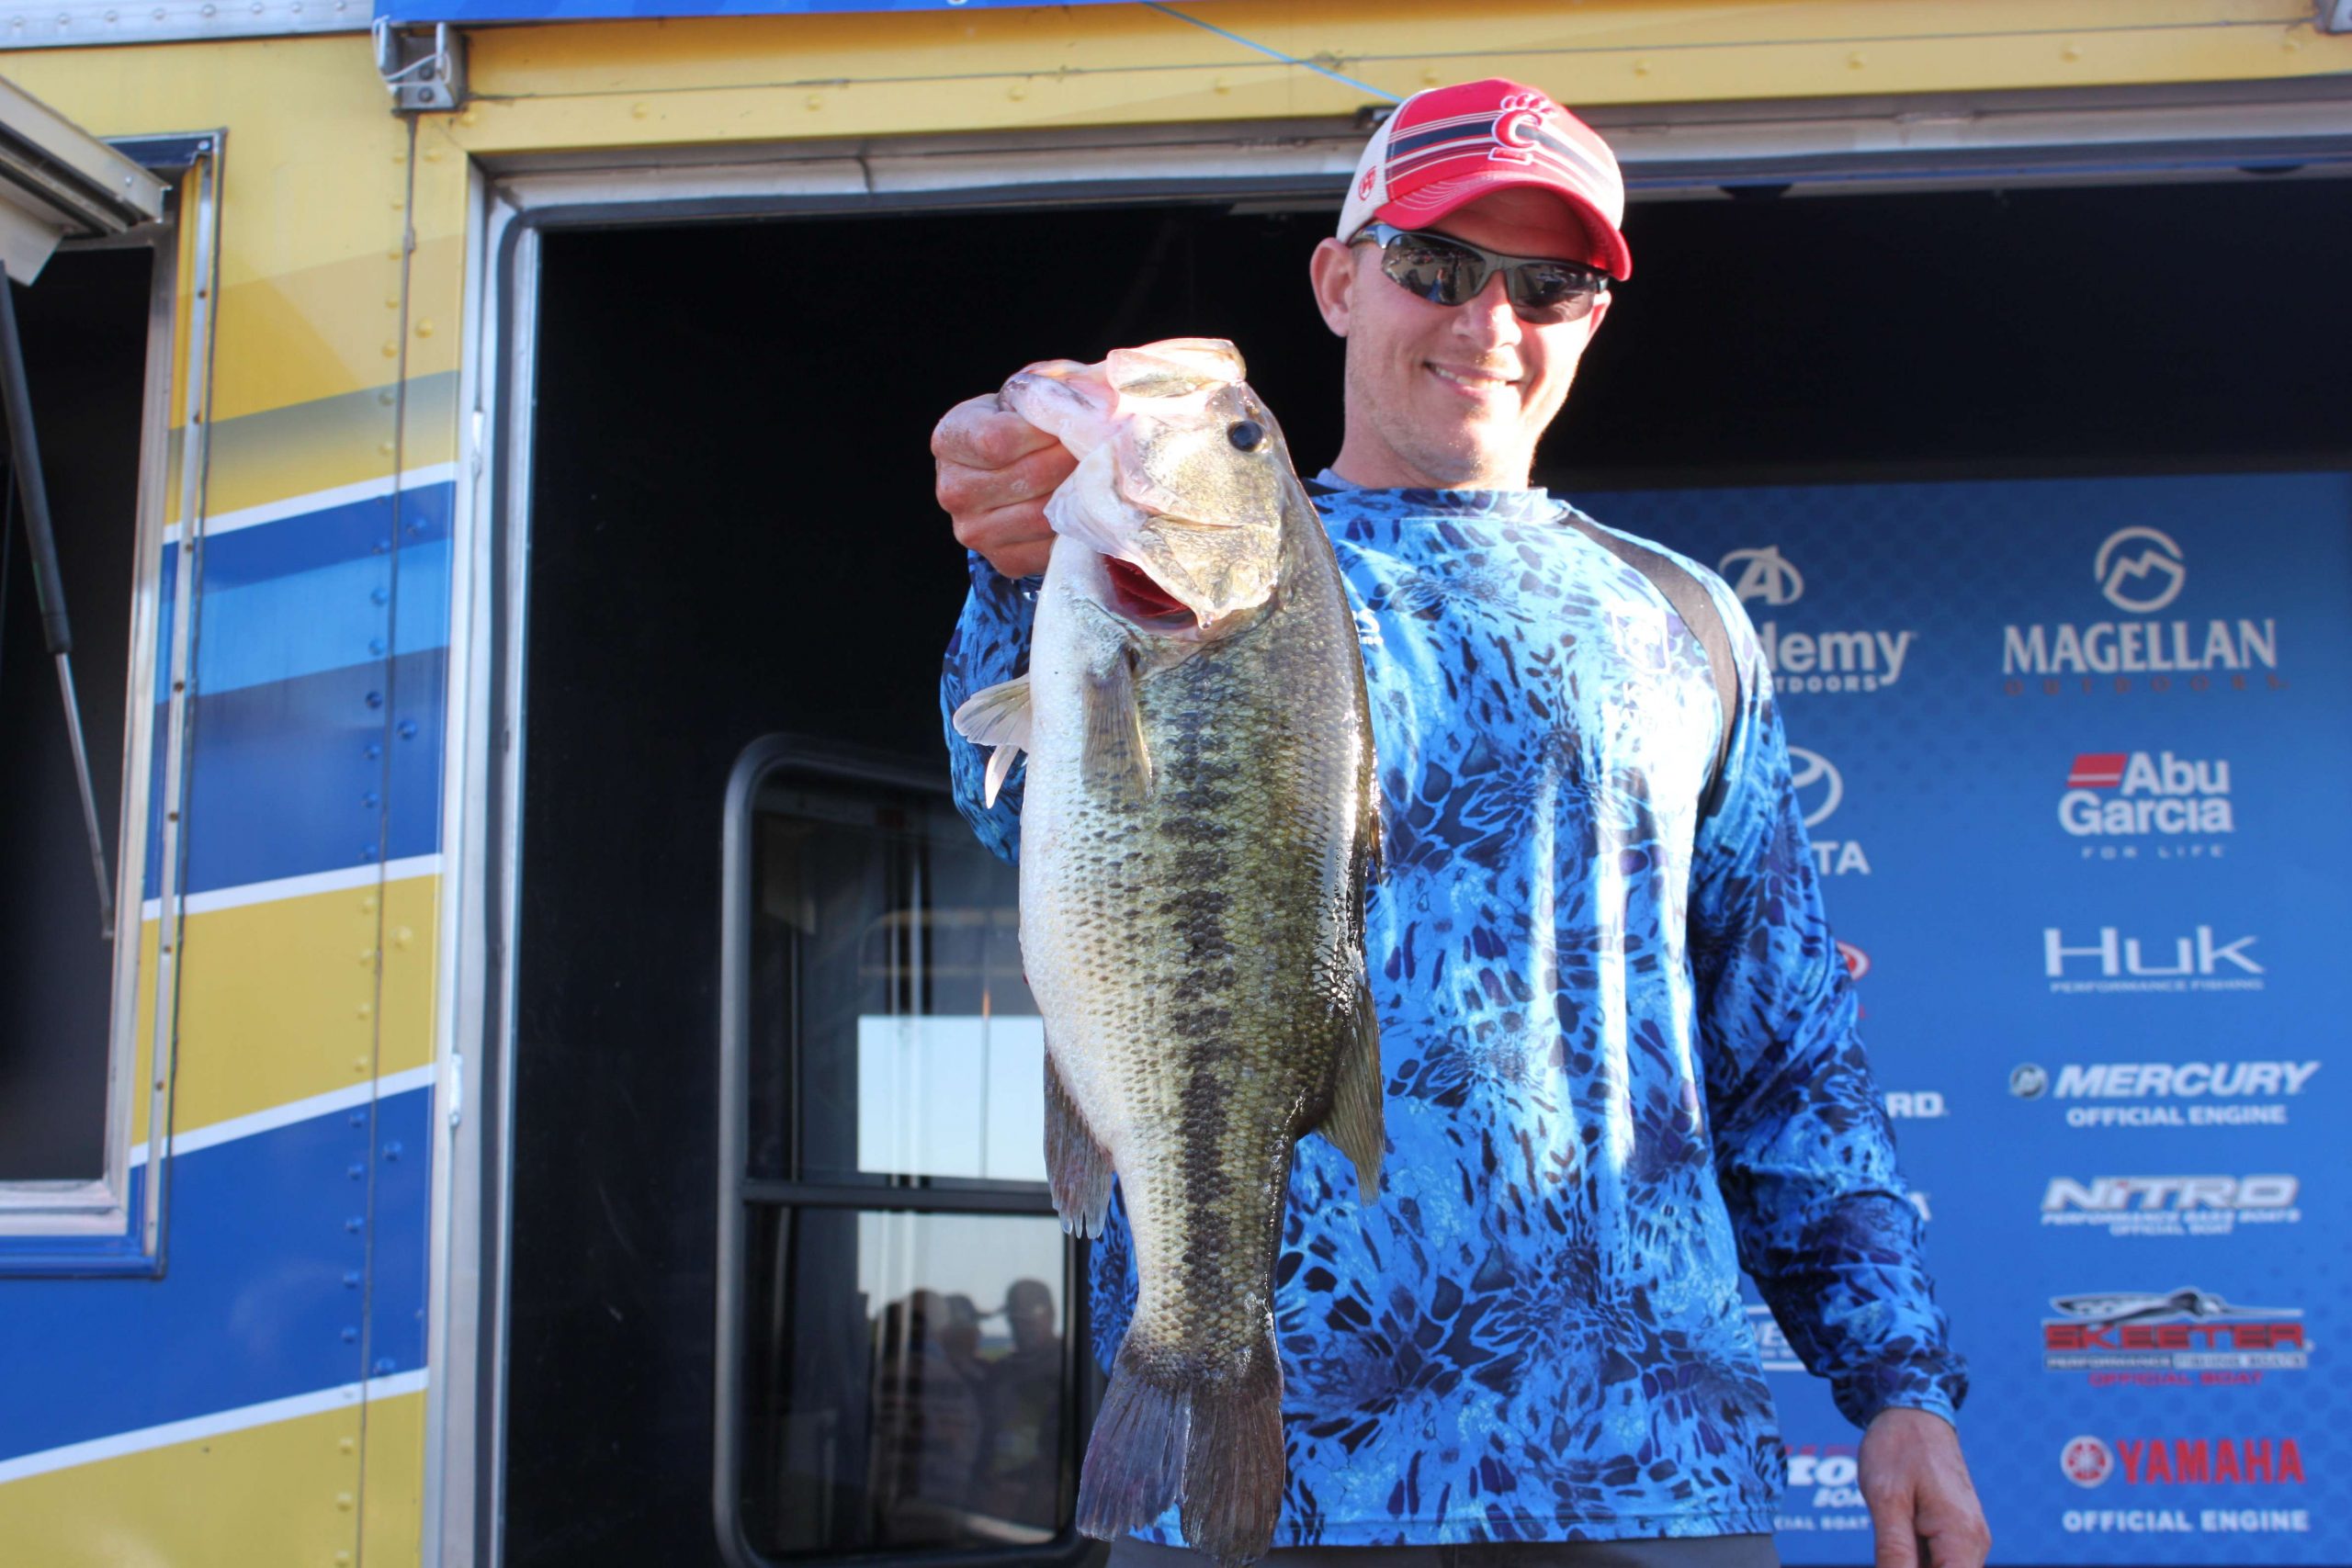 John Roth of Team Indiana is third among boaters with 20 pounds even. Here, he holds a 6-plus pounder that vaulted him near the top of the leaderboard.